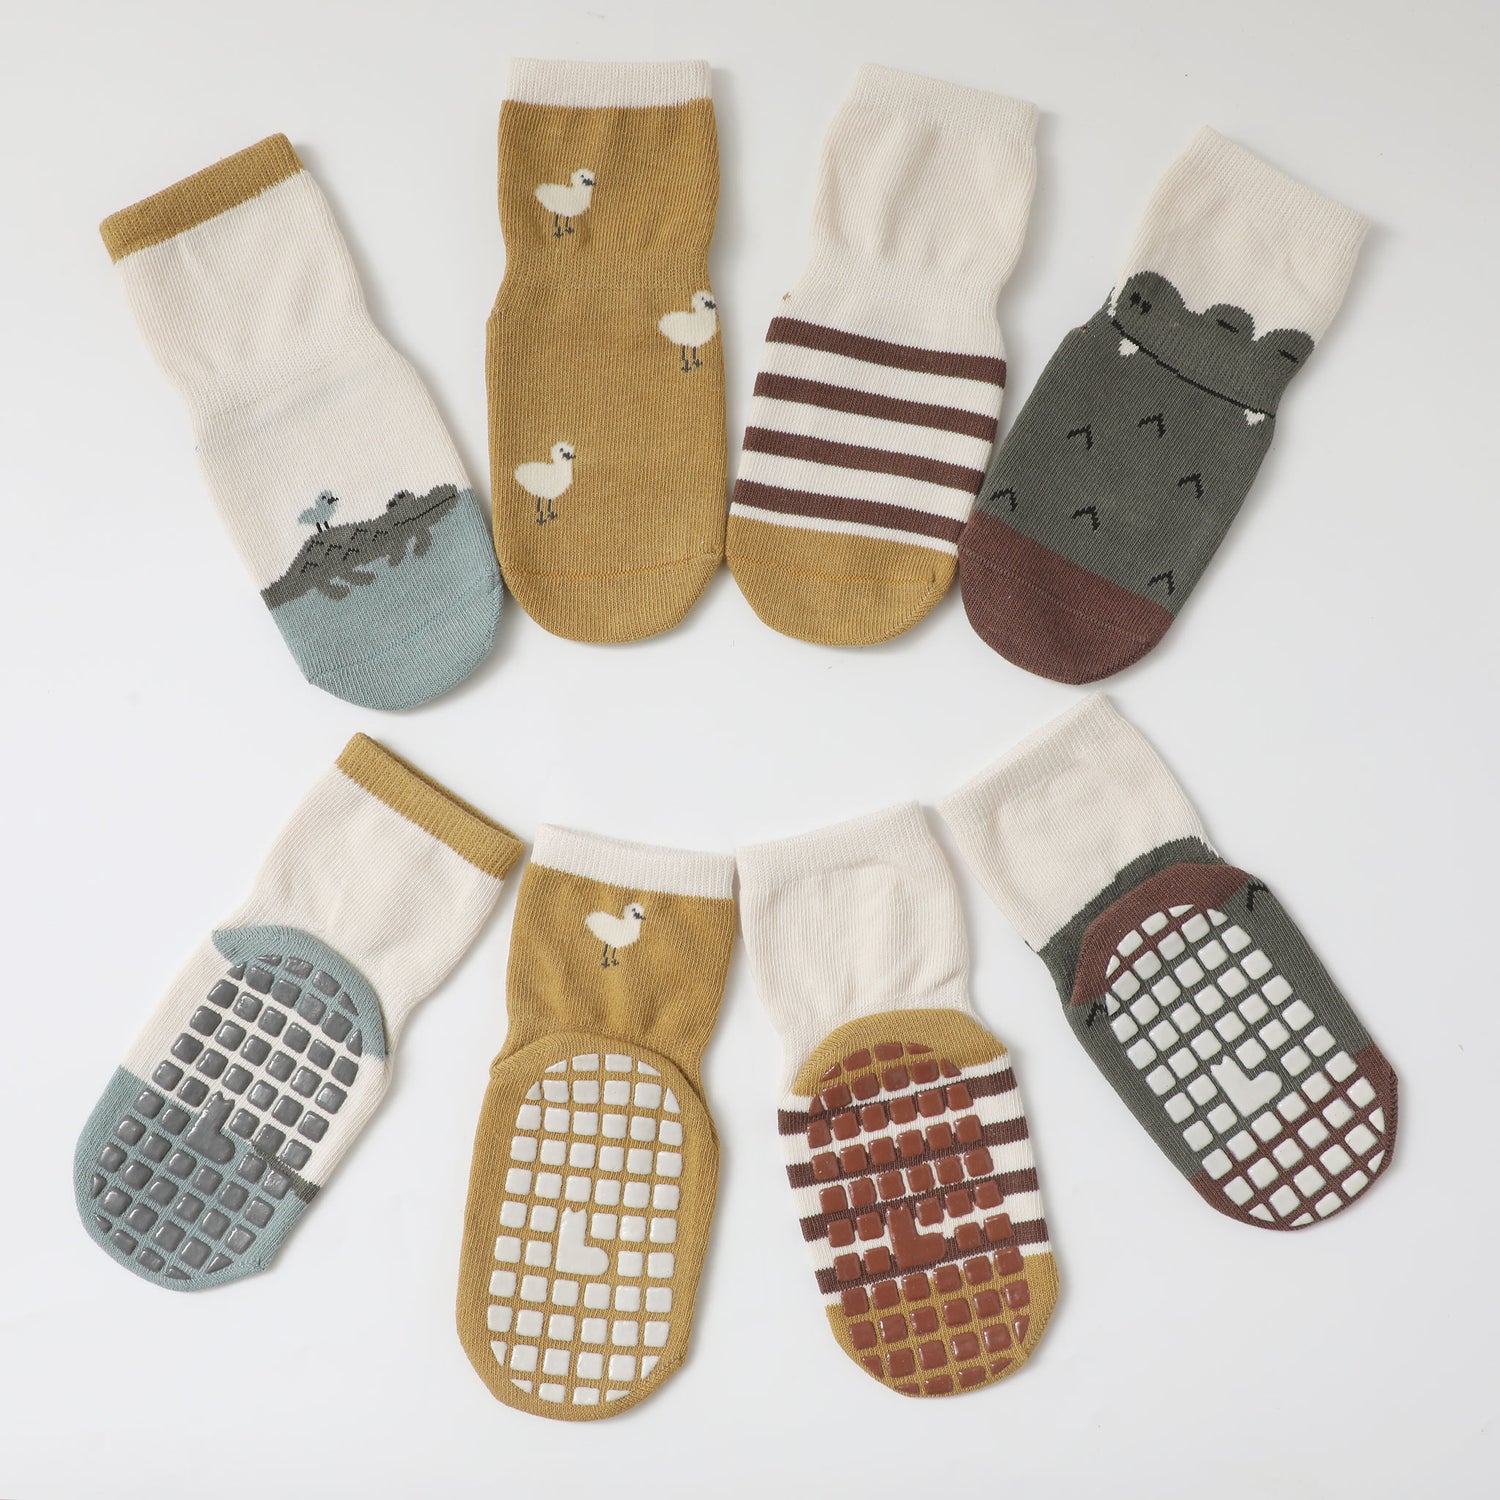 Enhanced safety with baby non-slip socks, featuring strategic ankle grips.